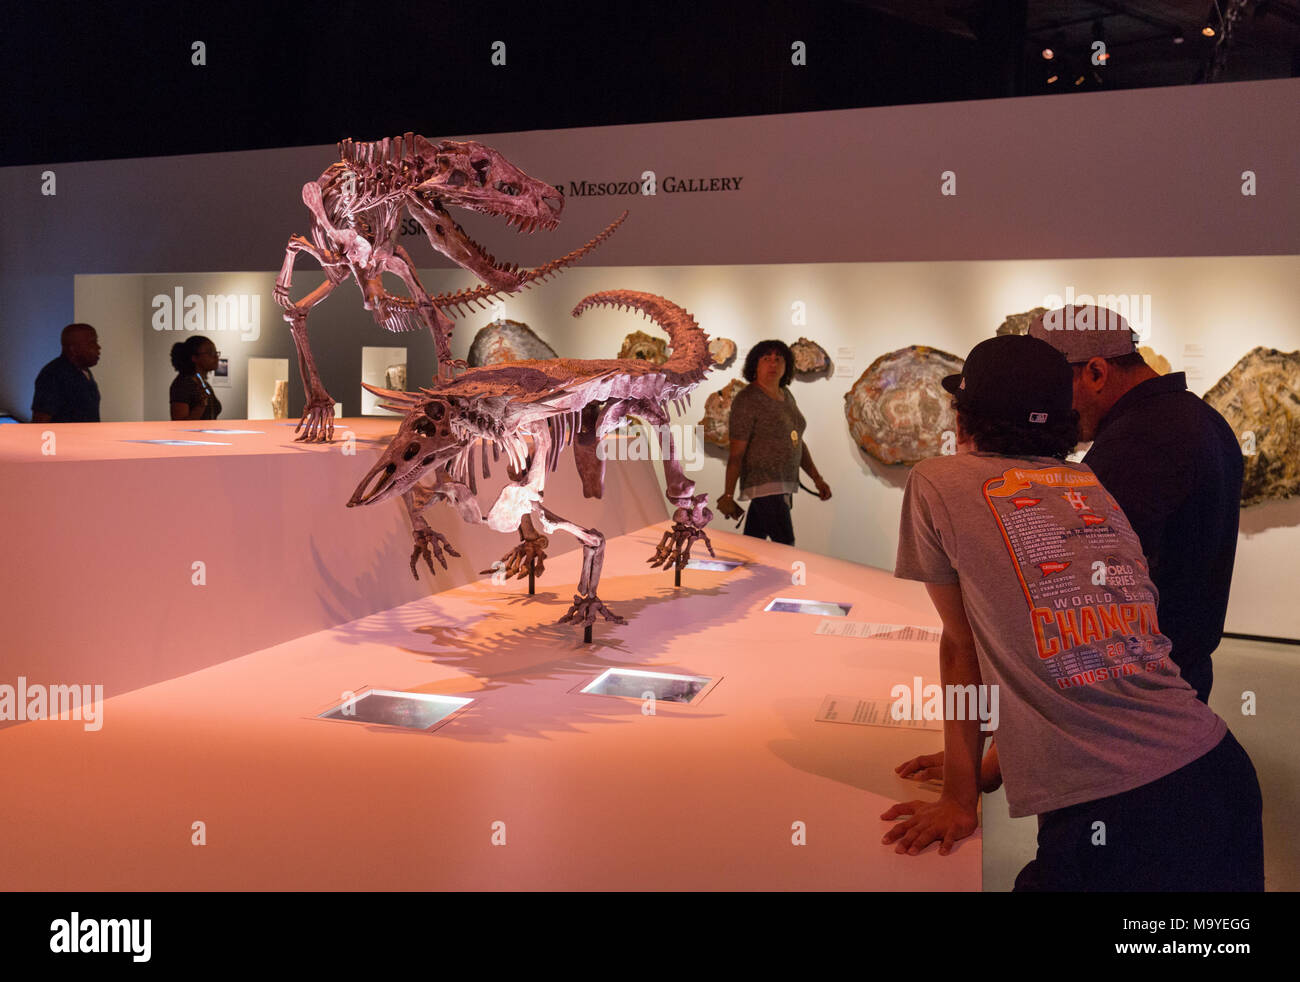 Besucher des Museums an Dinosaurier suchen, Houston Museum of Natural Science, Houston, Texas, USA Stockfoto